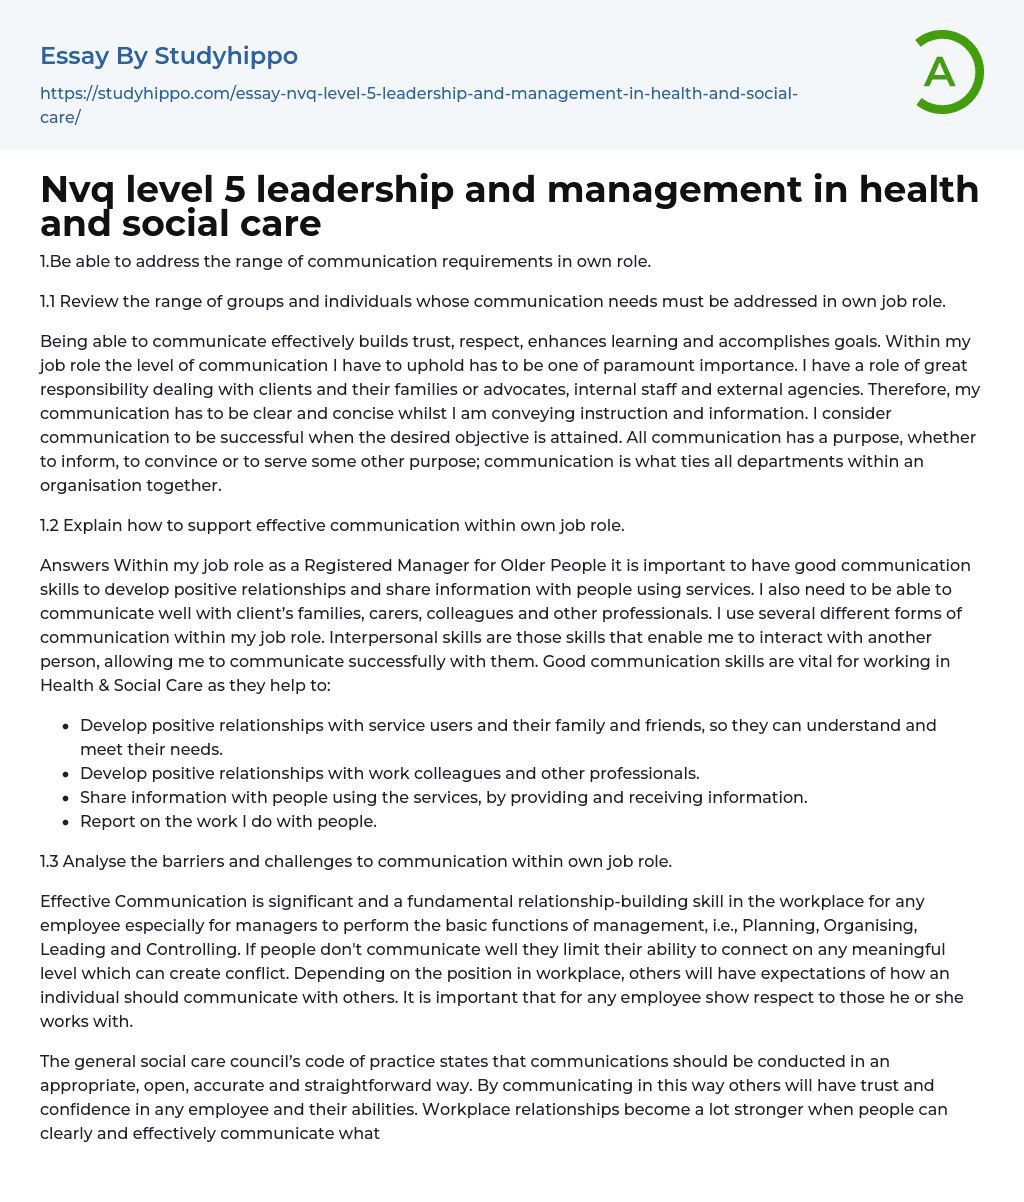 Nvq level 5 leadership and management in health and social care Essay Example